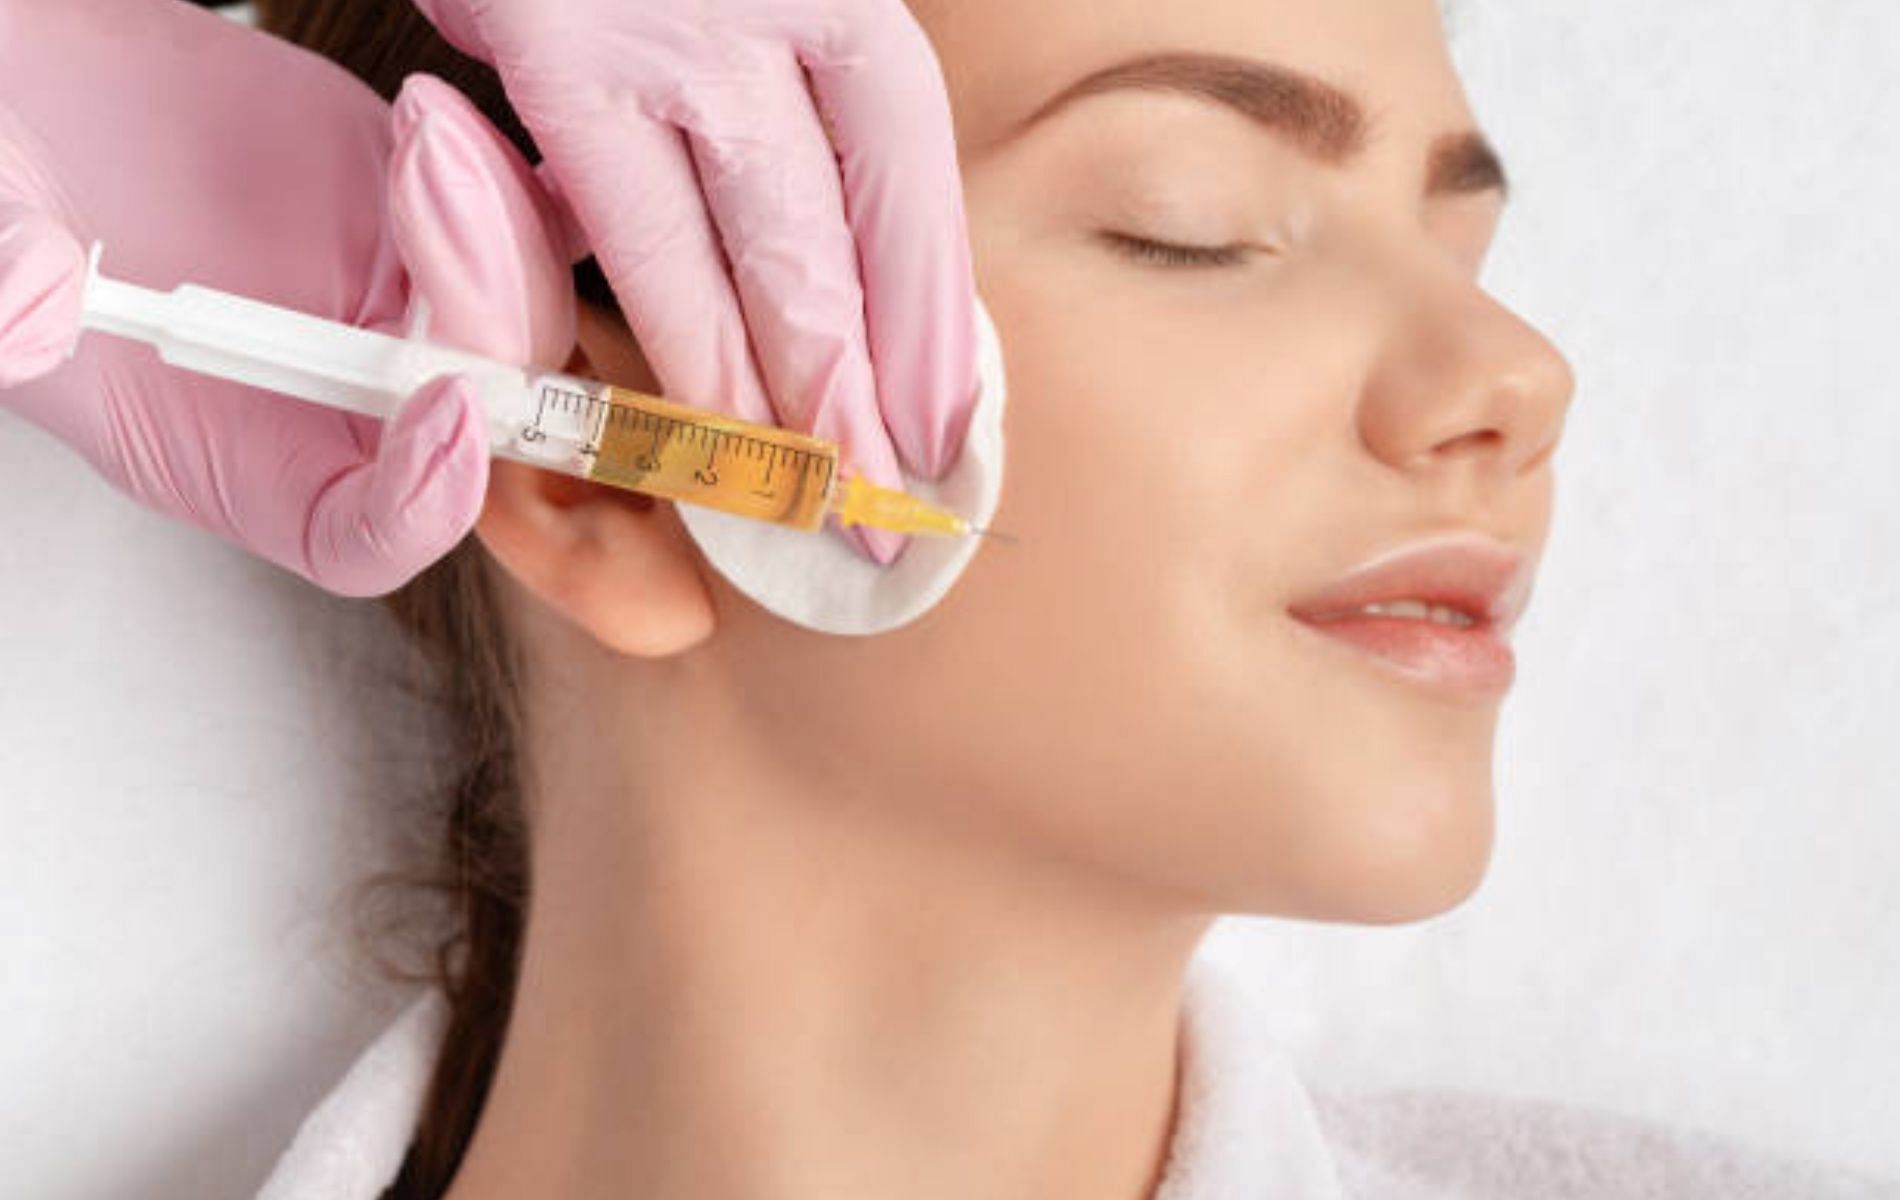 PRP Therapy or Platelet-Rich Plasma treatment for skin (Image by iStock photos via Pexels)